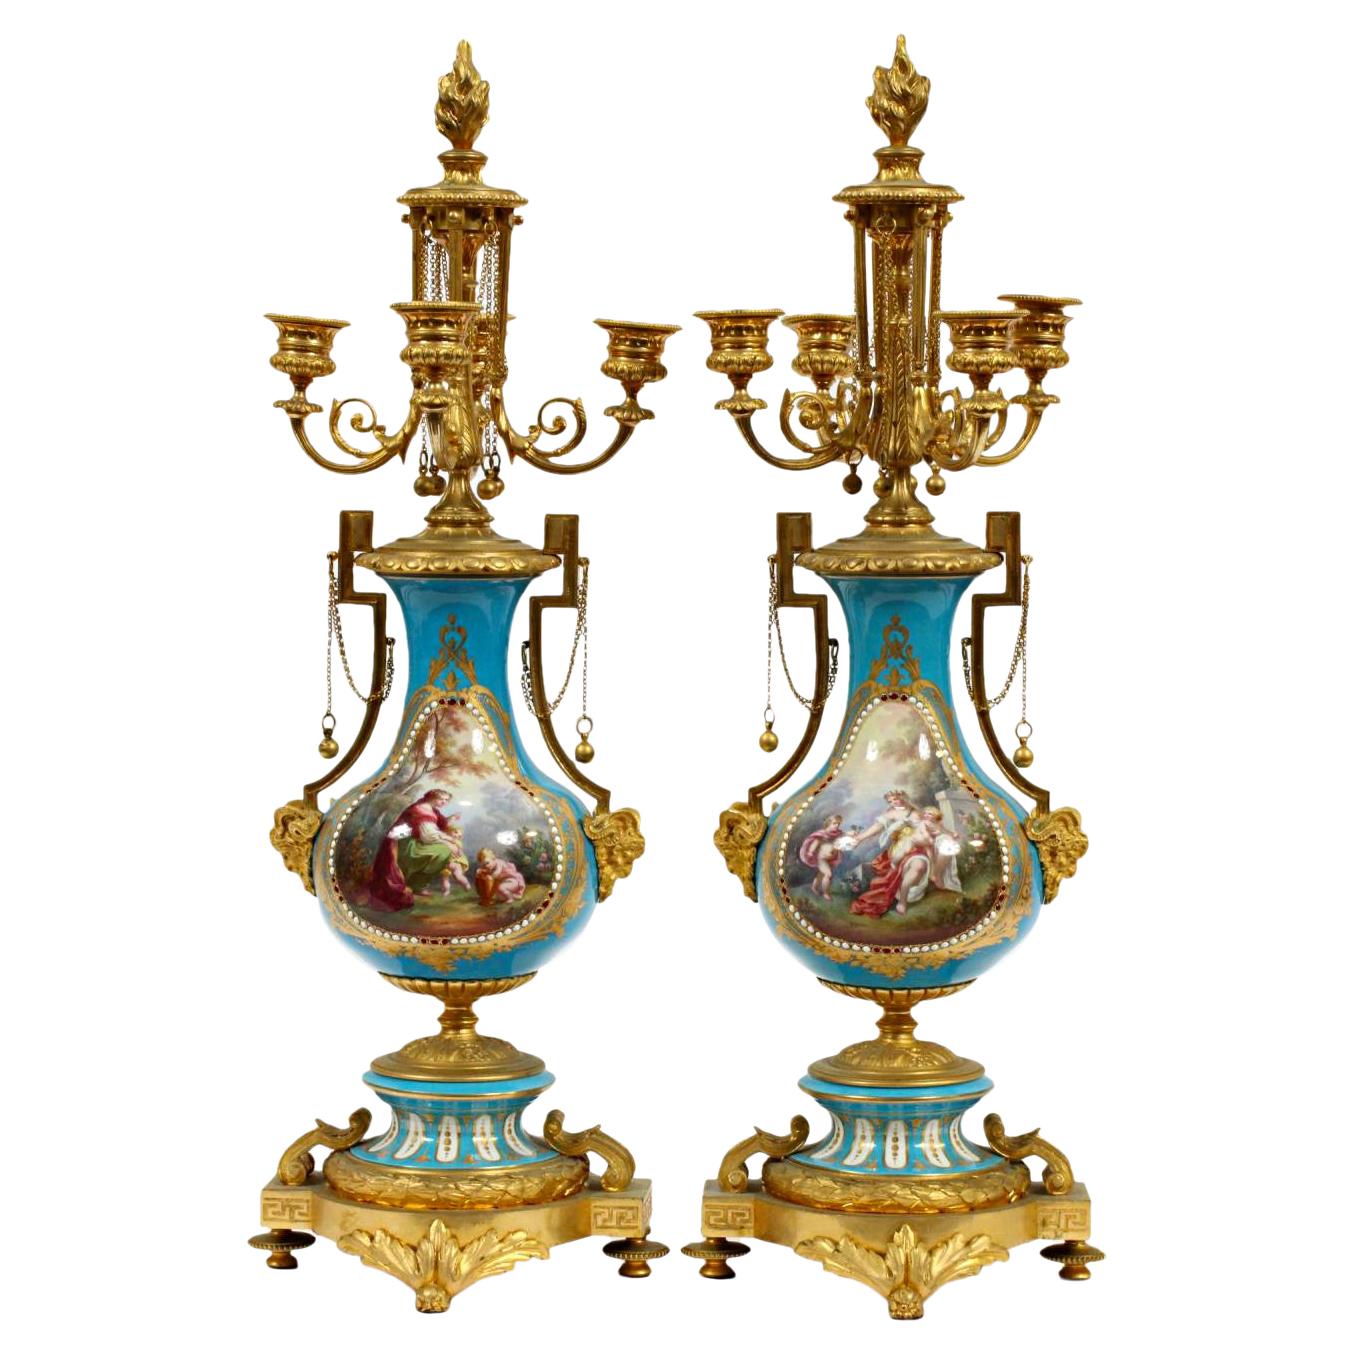 Fine Quality Pair of Gilt Bronze Mounted Jeweled Porcelain Four-Light Candelab For Sale